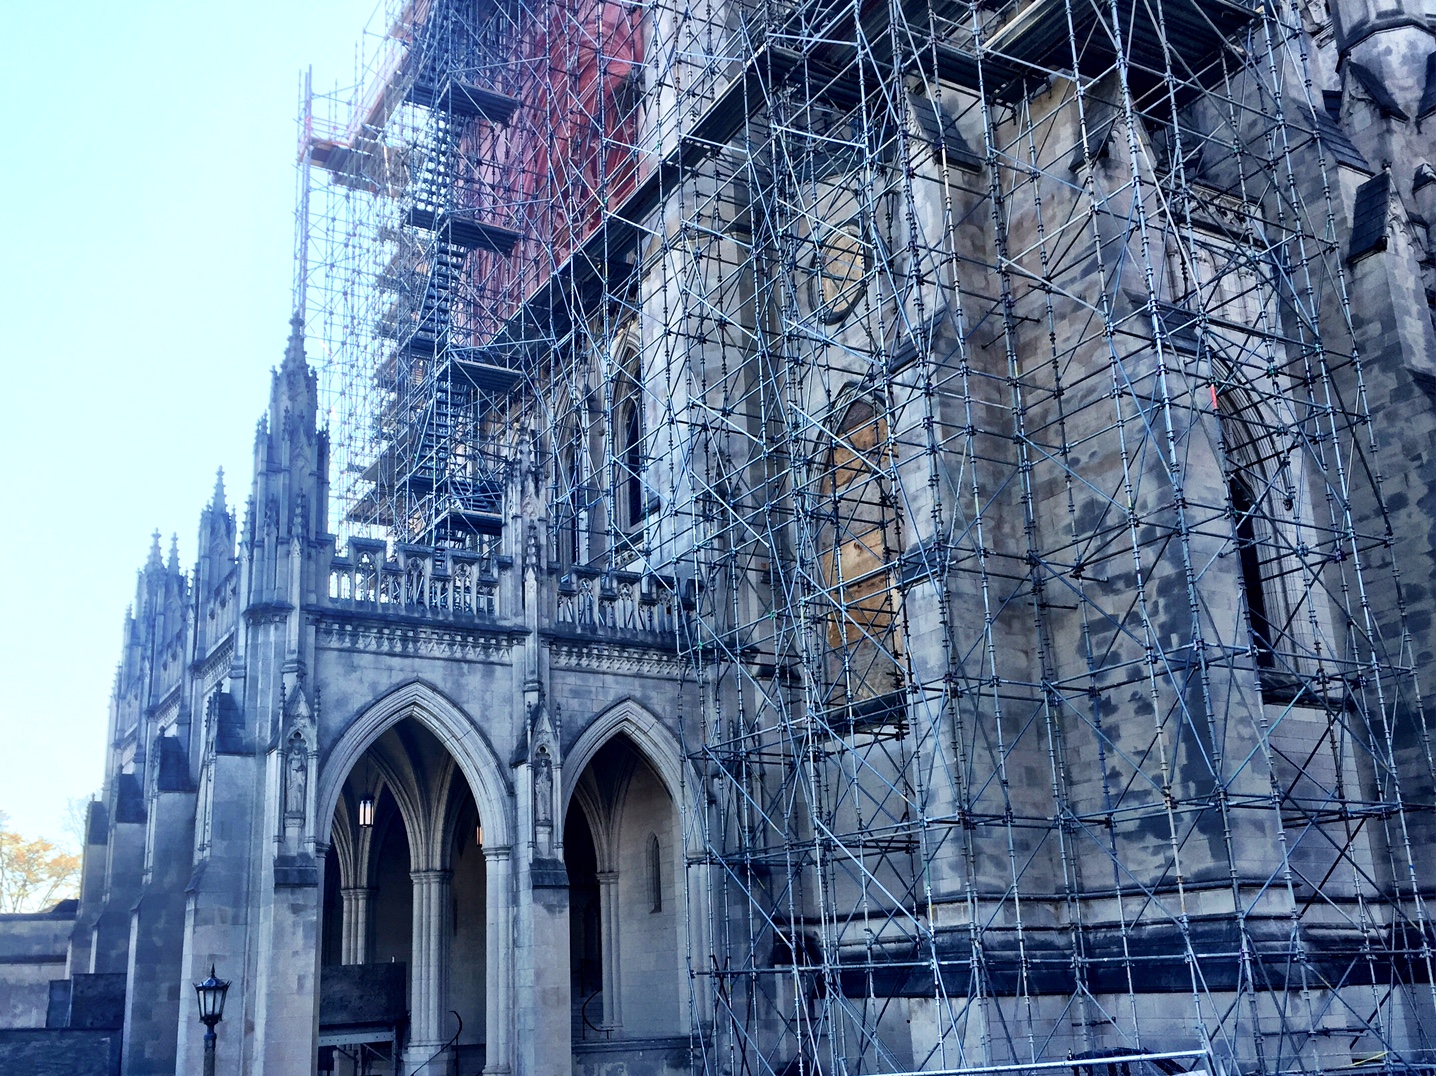 Scaffolding went up around Easter, to prepare for Phase II of the National Cathedral's restoration. (WTOP/Neal Augenstein)